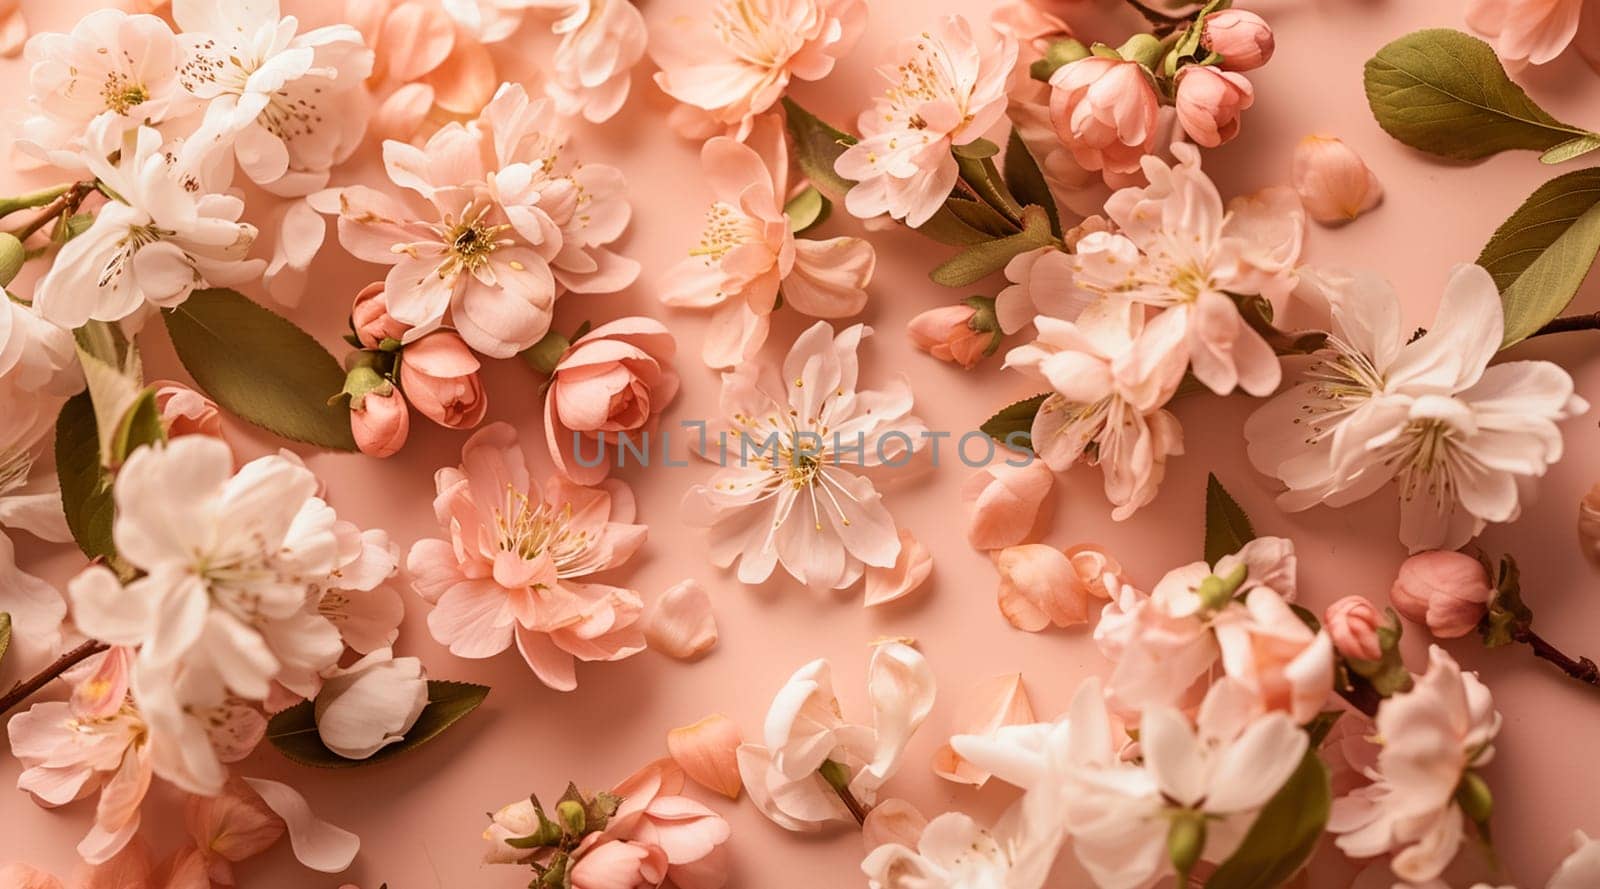 Flowers on a peach background. Spring floral flat lay background by kizuneko